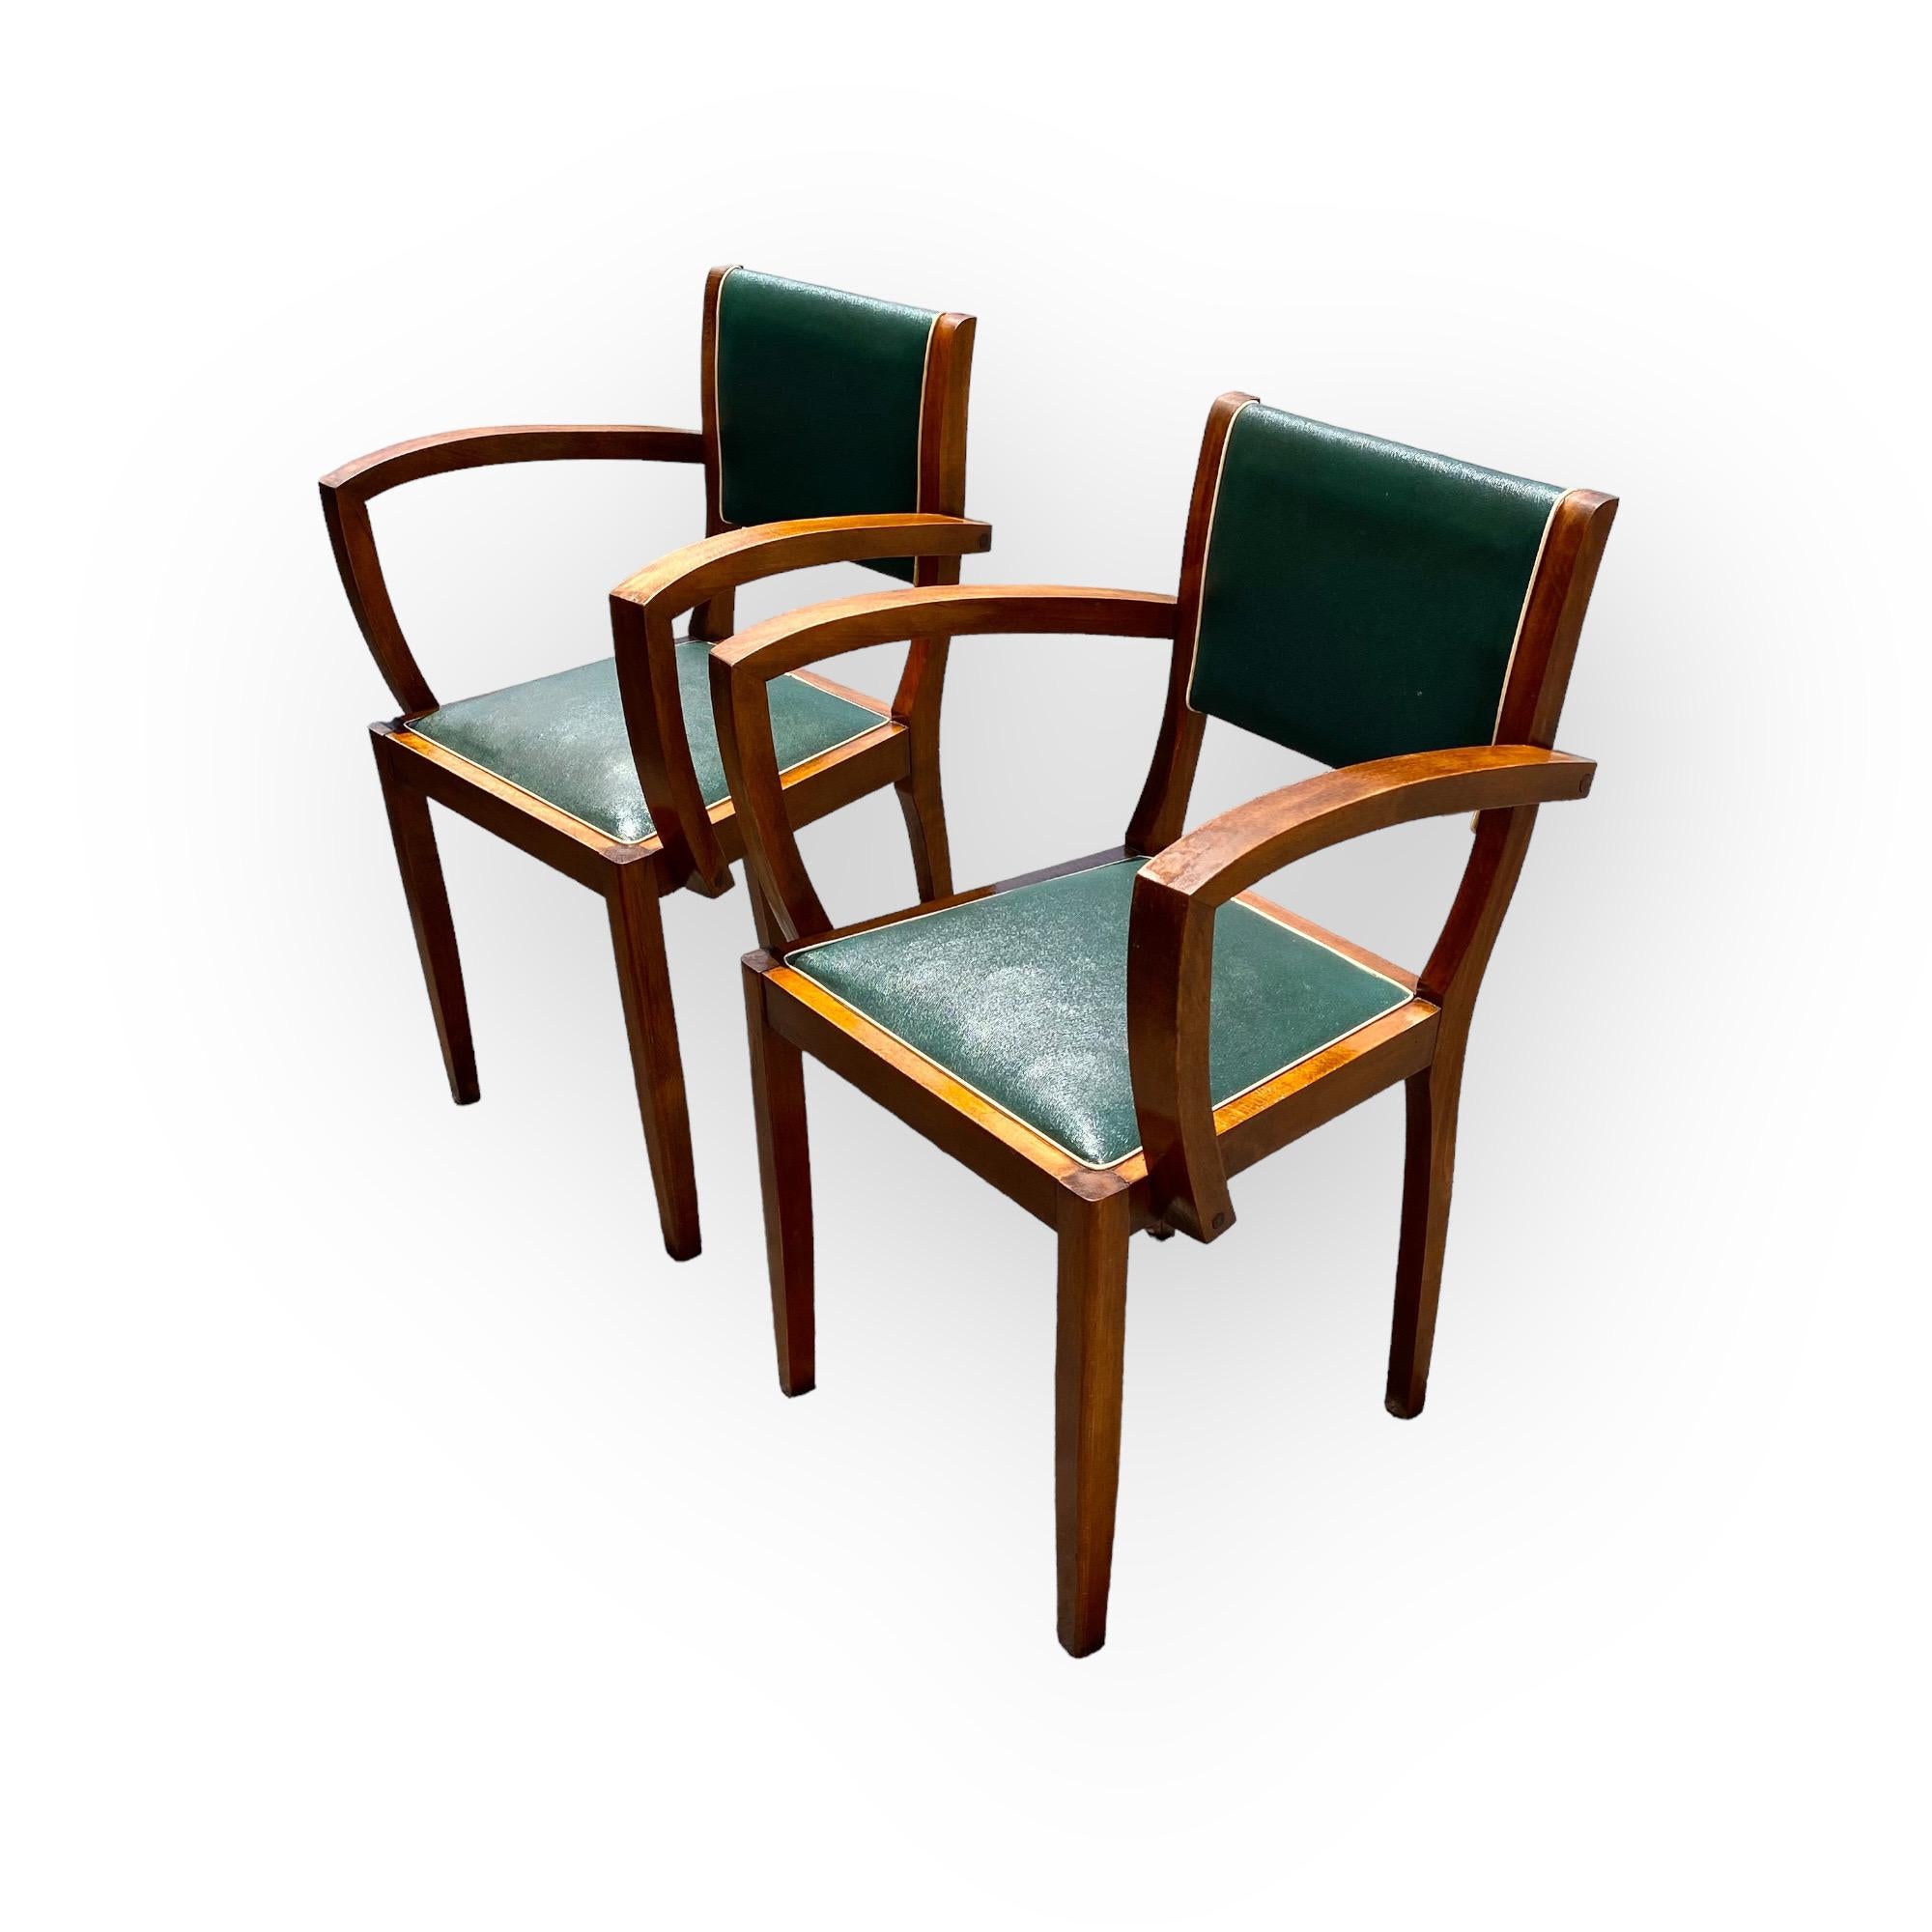 Embossed Pair of Bridge Chairs Green Faux Leather French Art Deco, circa 1930